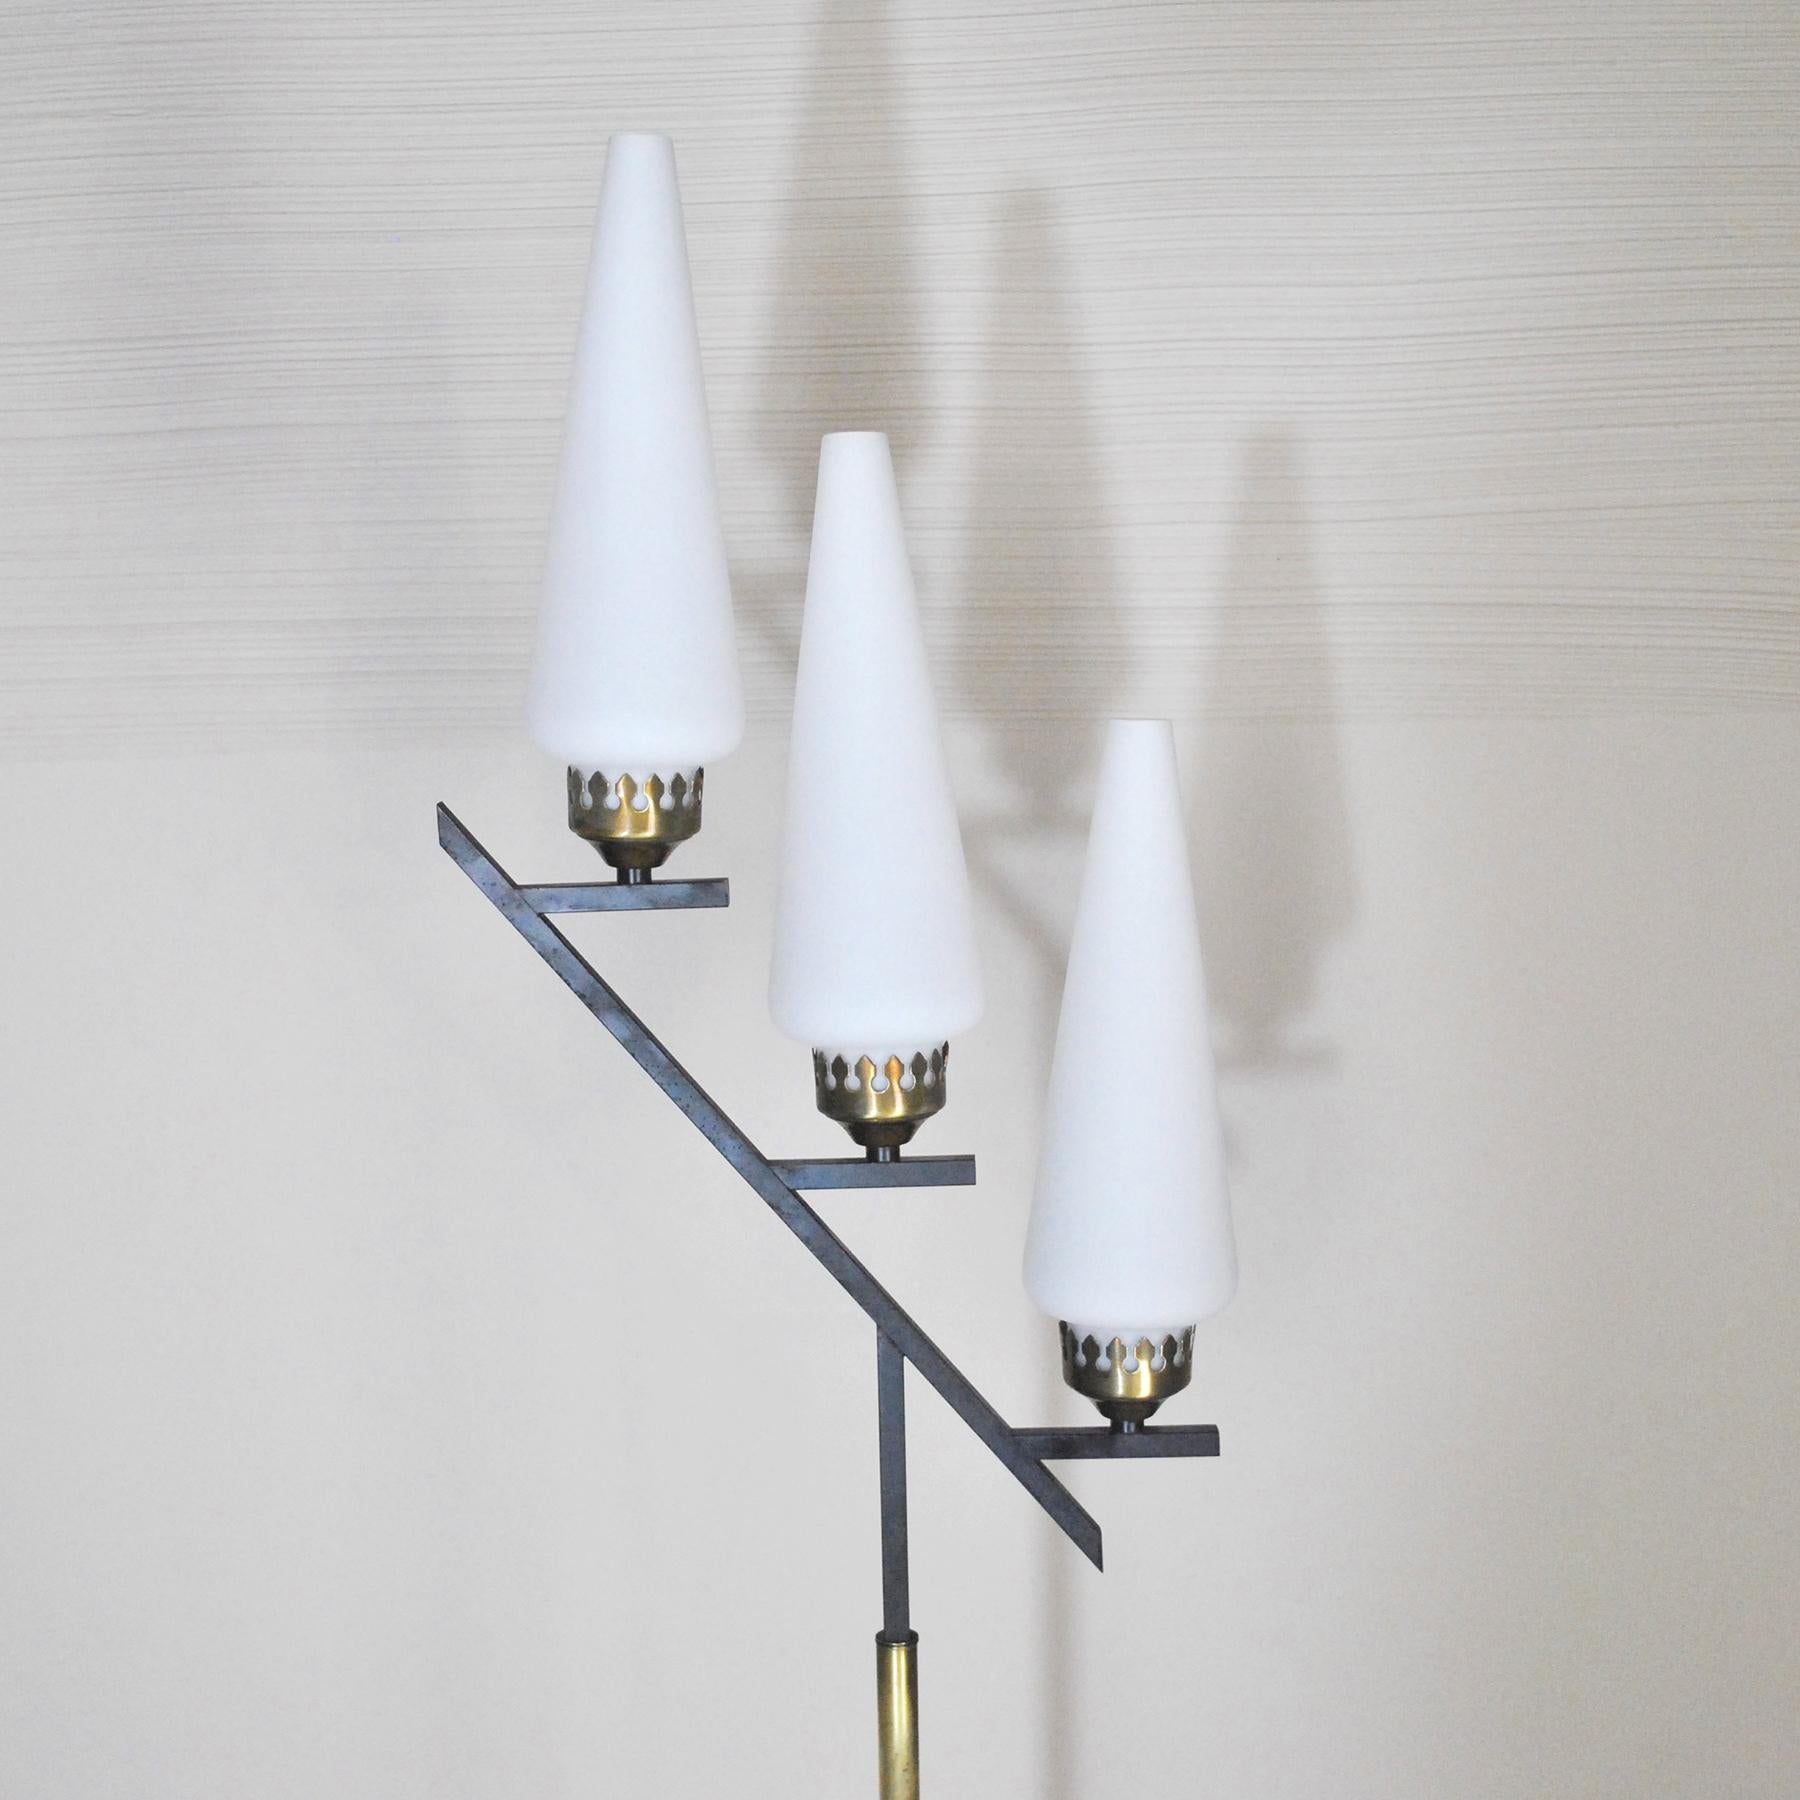 Stilnovo Italian Midcentury Floor Lamp in Brass and Opaline from the 1950s In Good Condition For Sale In bari, IT